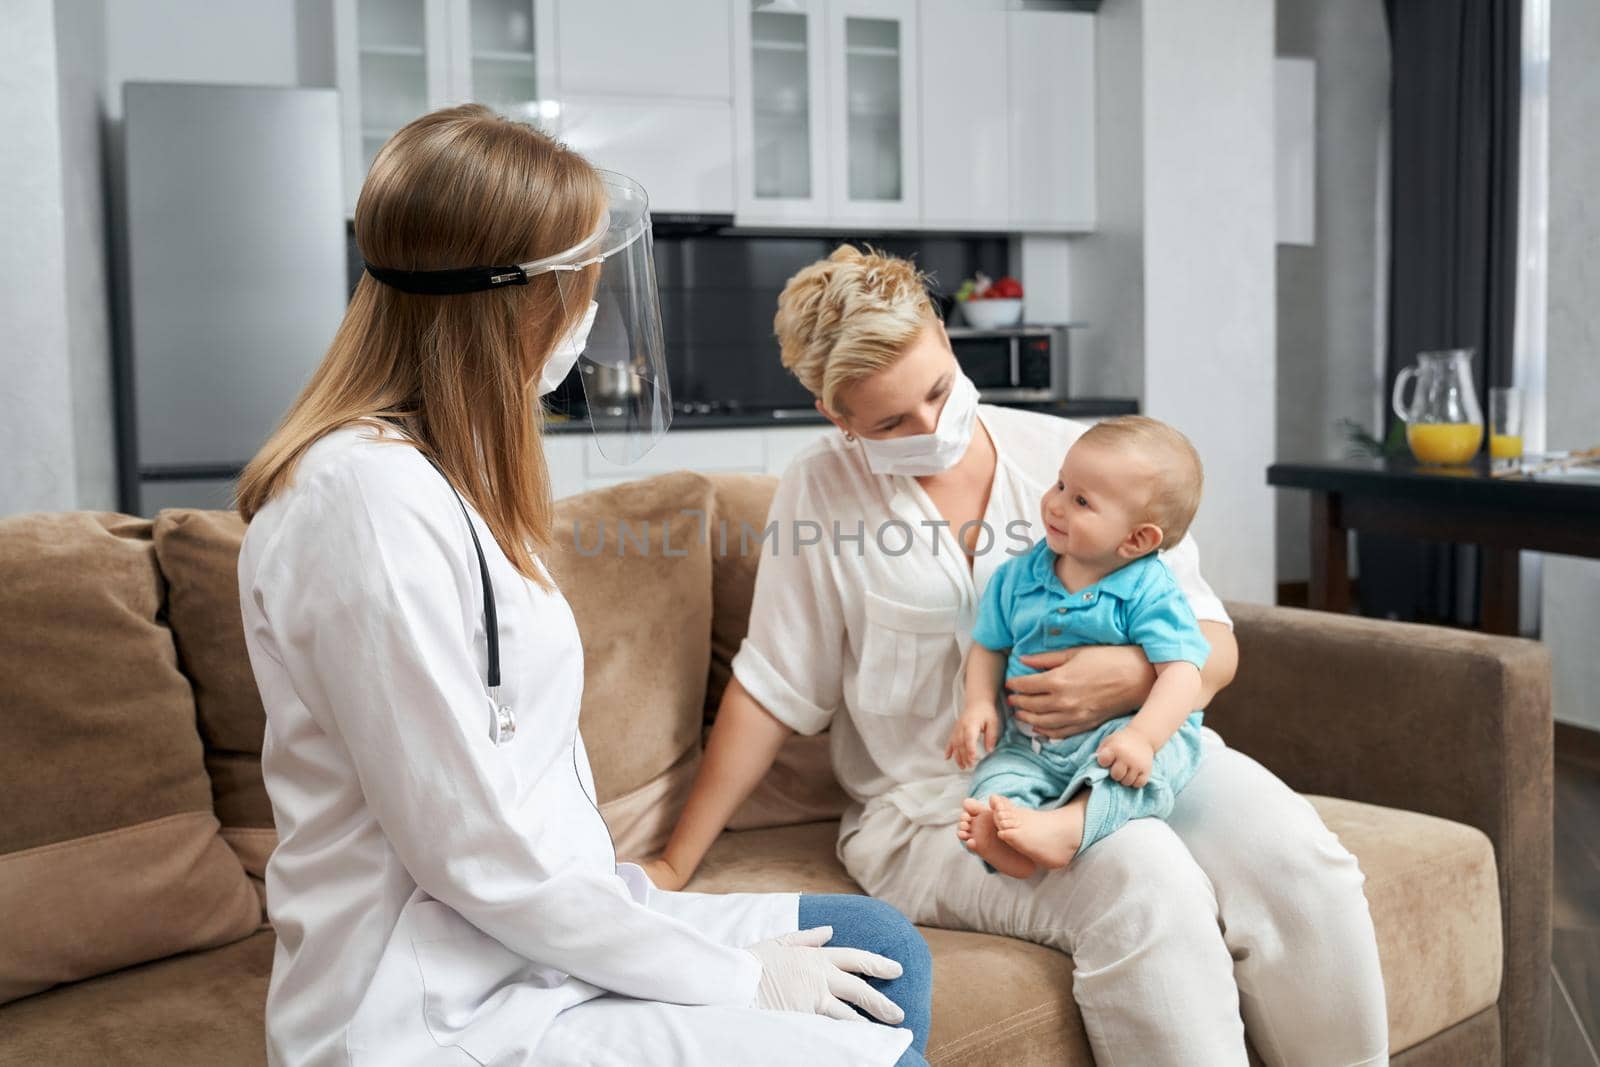 Pediatrician in medical mask visiting baby at home by SerhiiBobyk